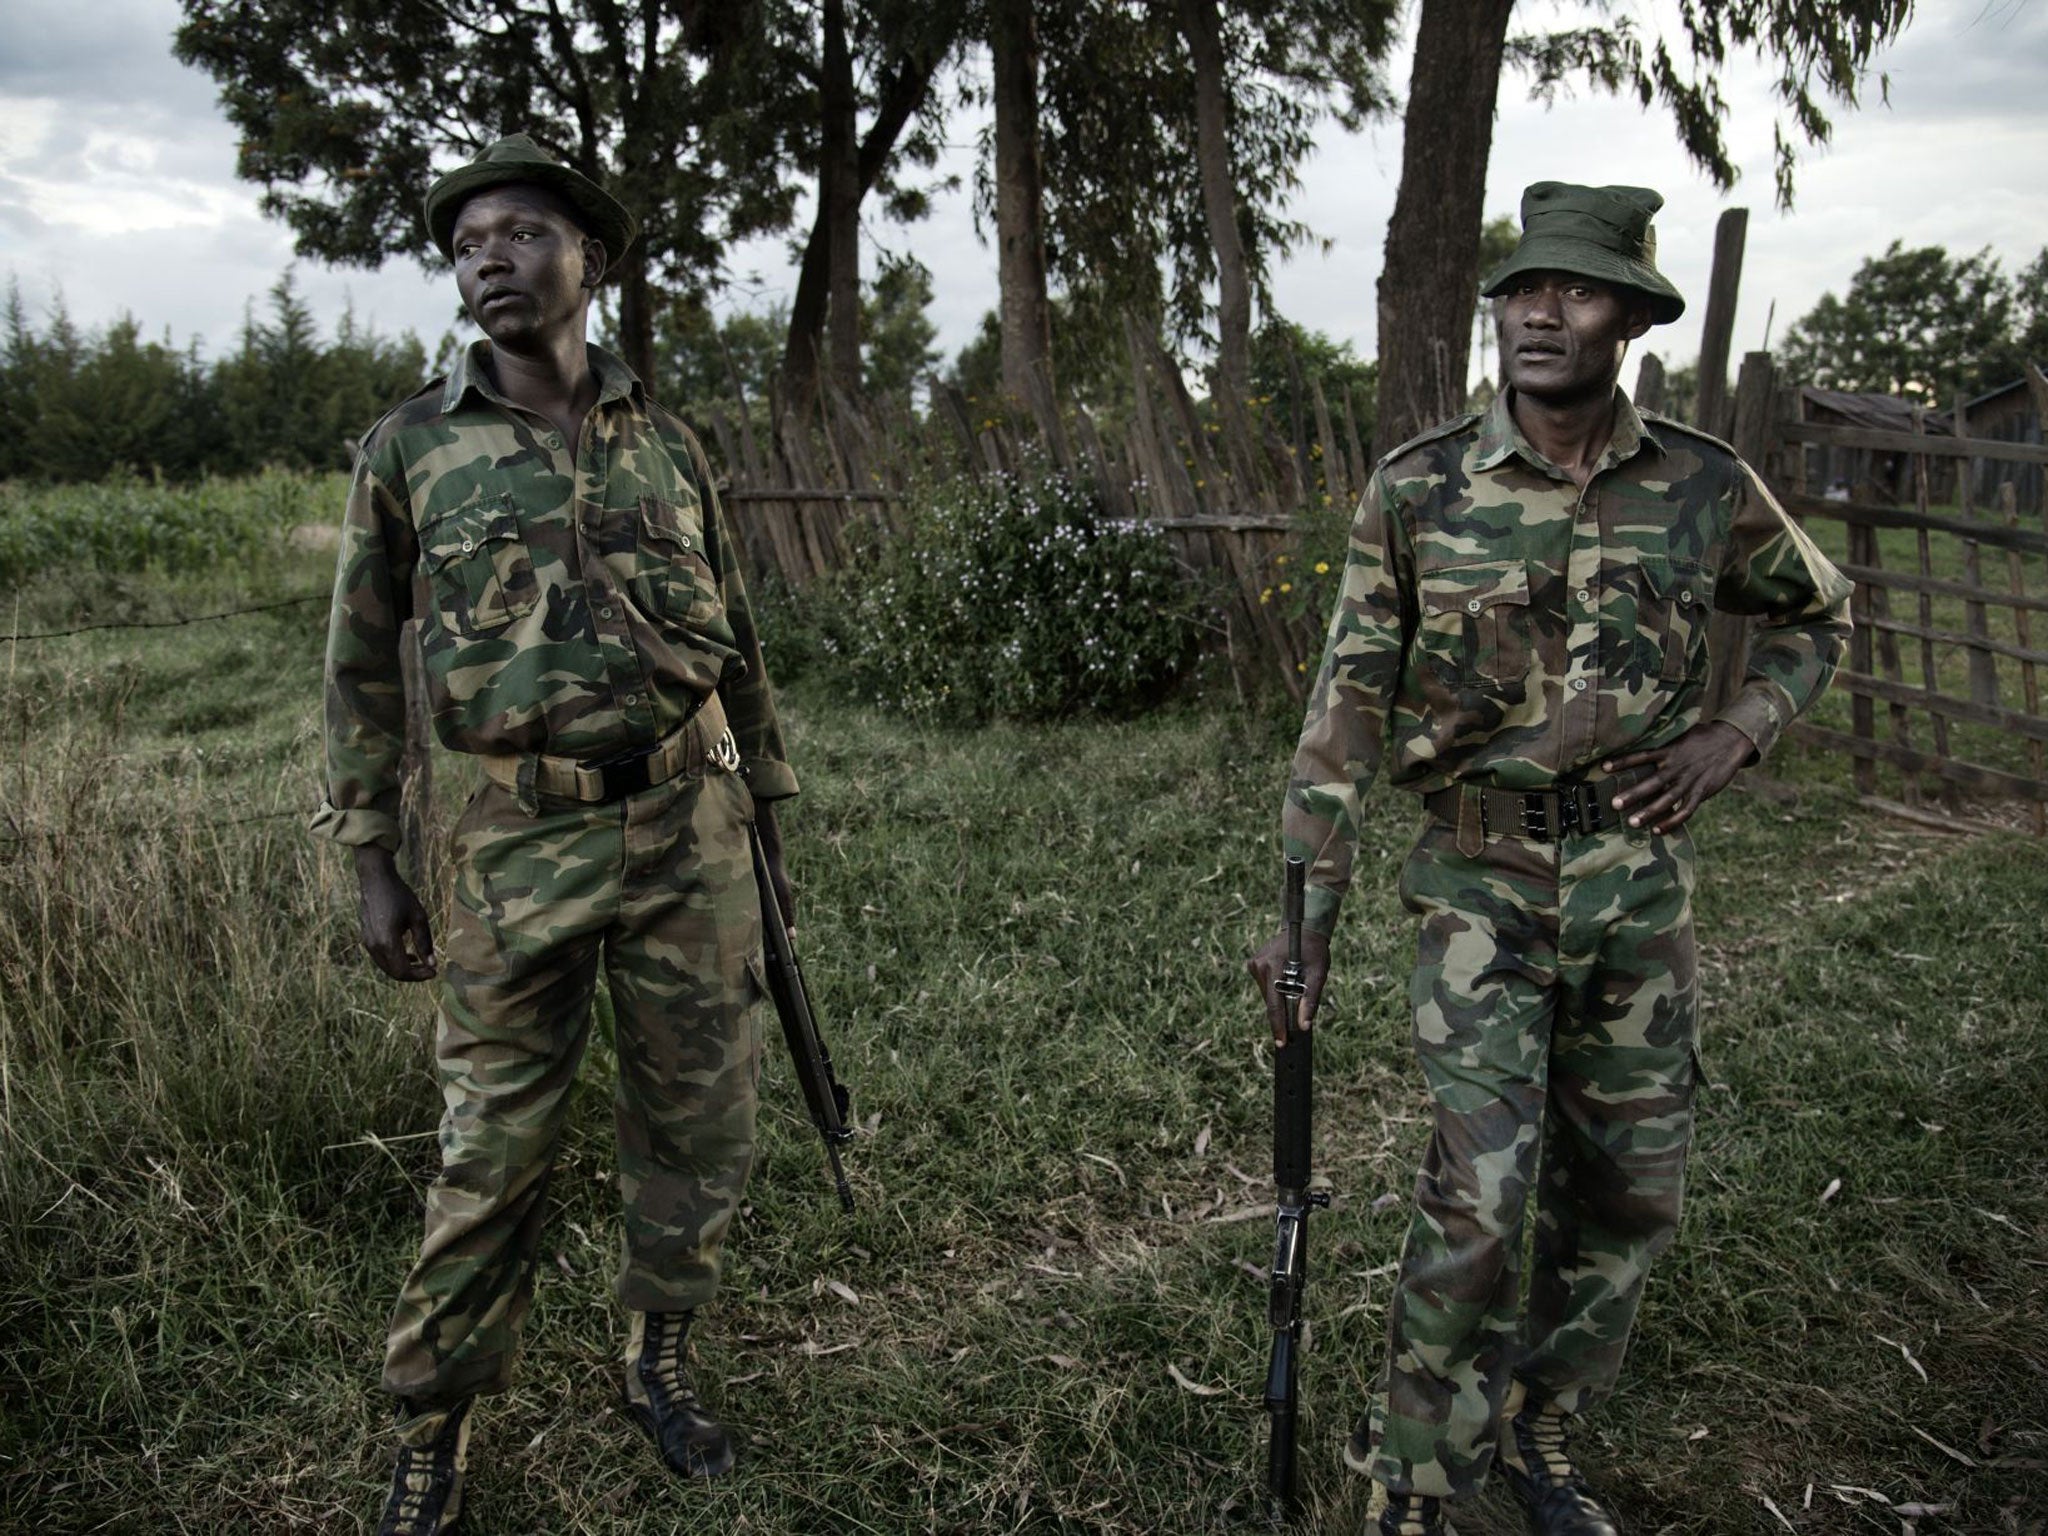 Kenya Wildlife Service rangers live on the edge of Ramuruti forest in Laikipia, Kenya where they patrol as a way to deter poachers